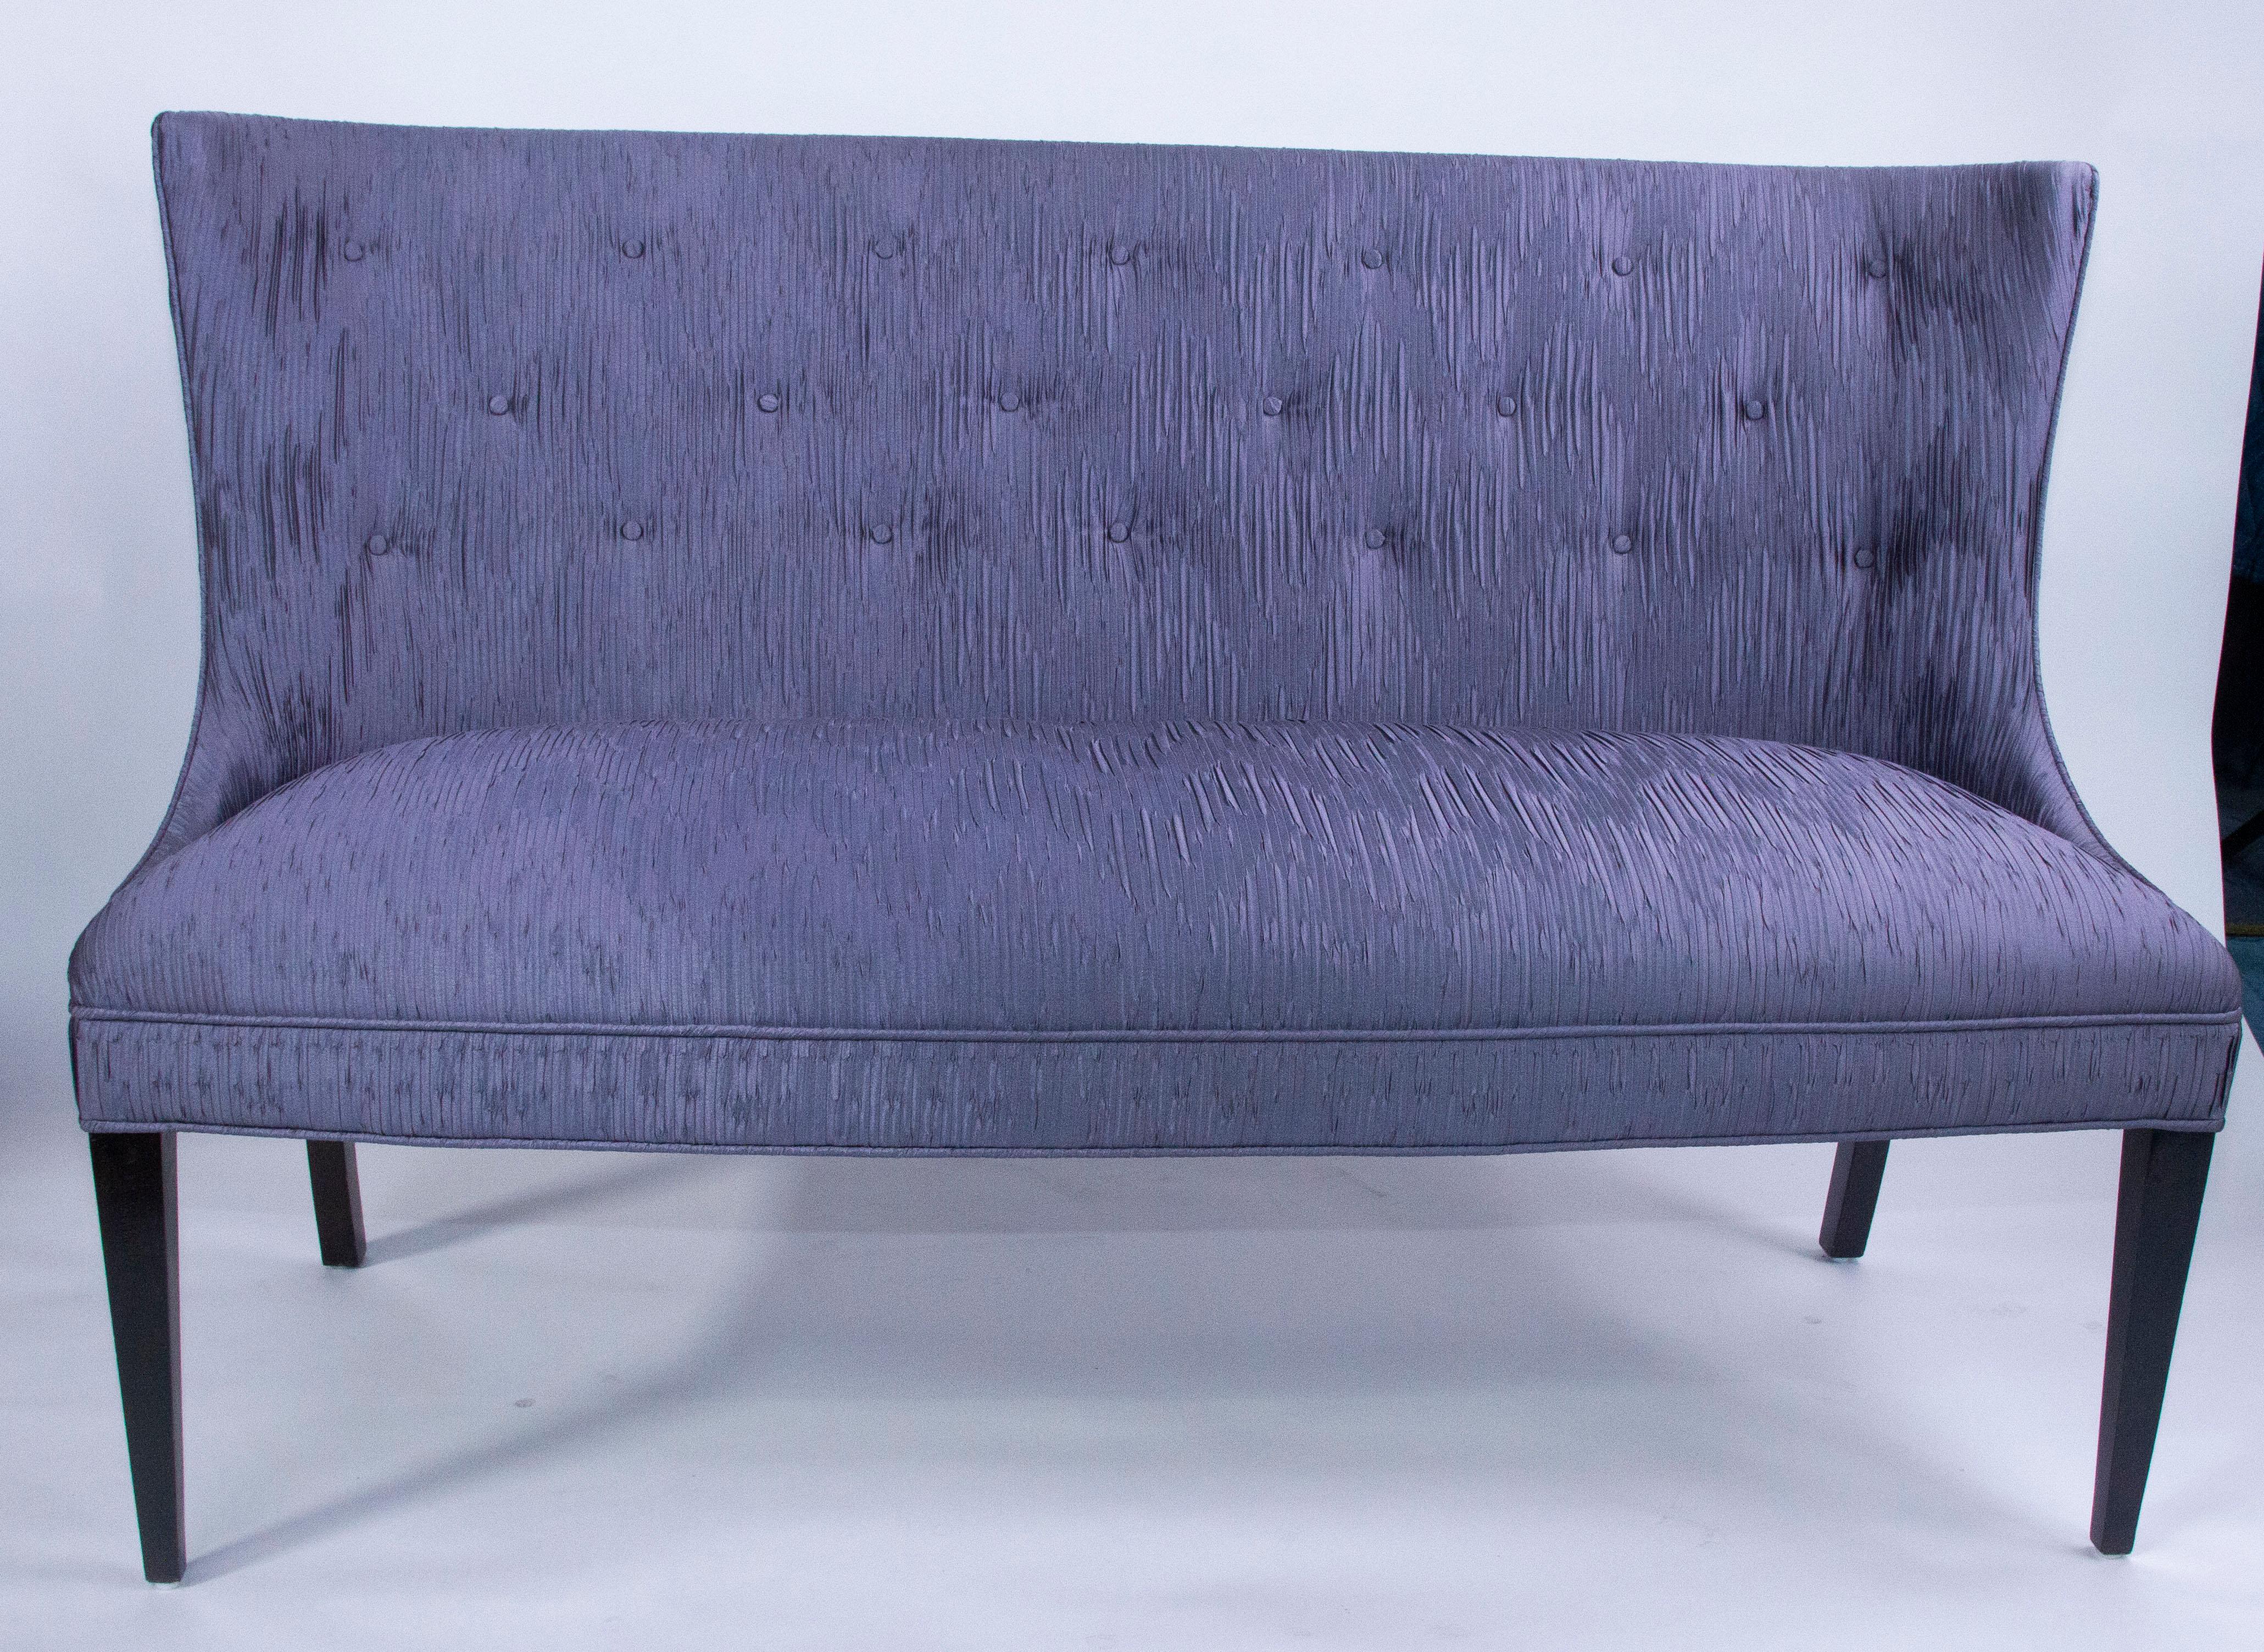 Contemporary French settee 1940's style with Tufted Back and Tapered Legs For Sale